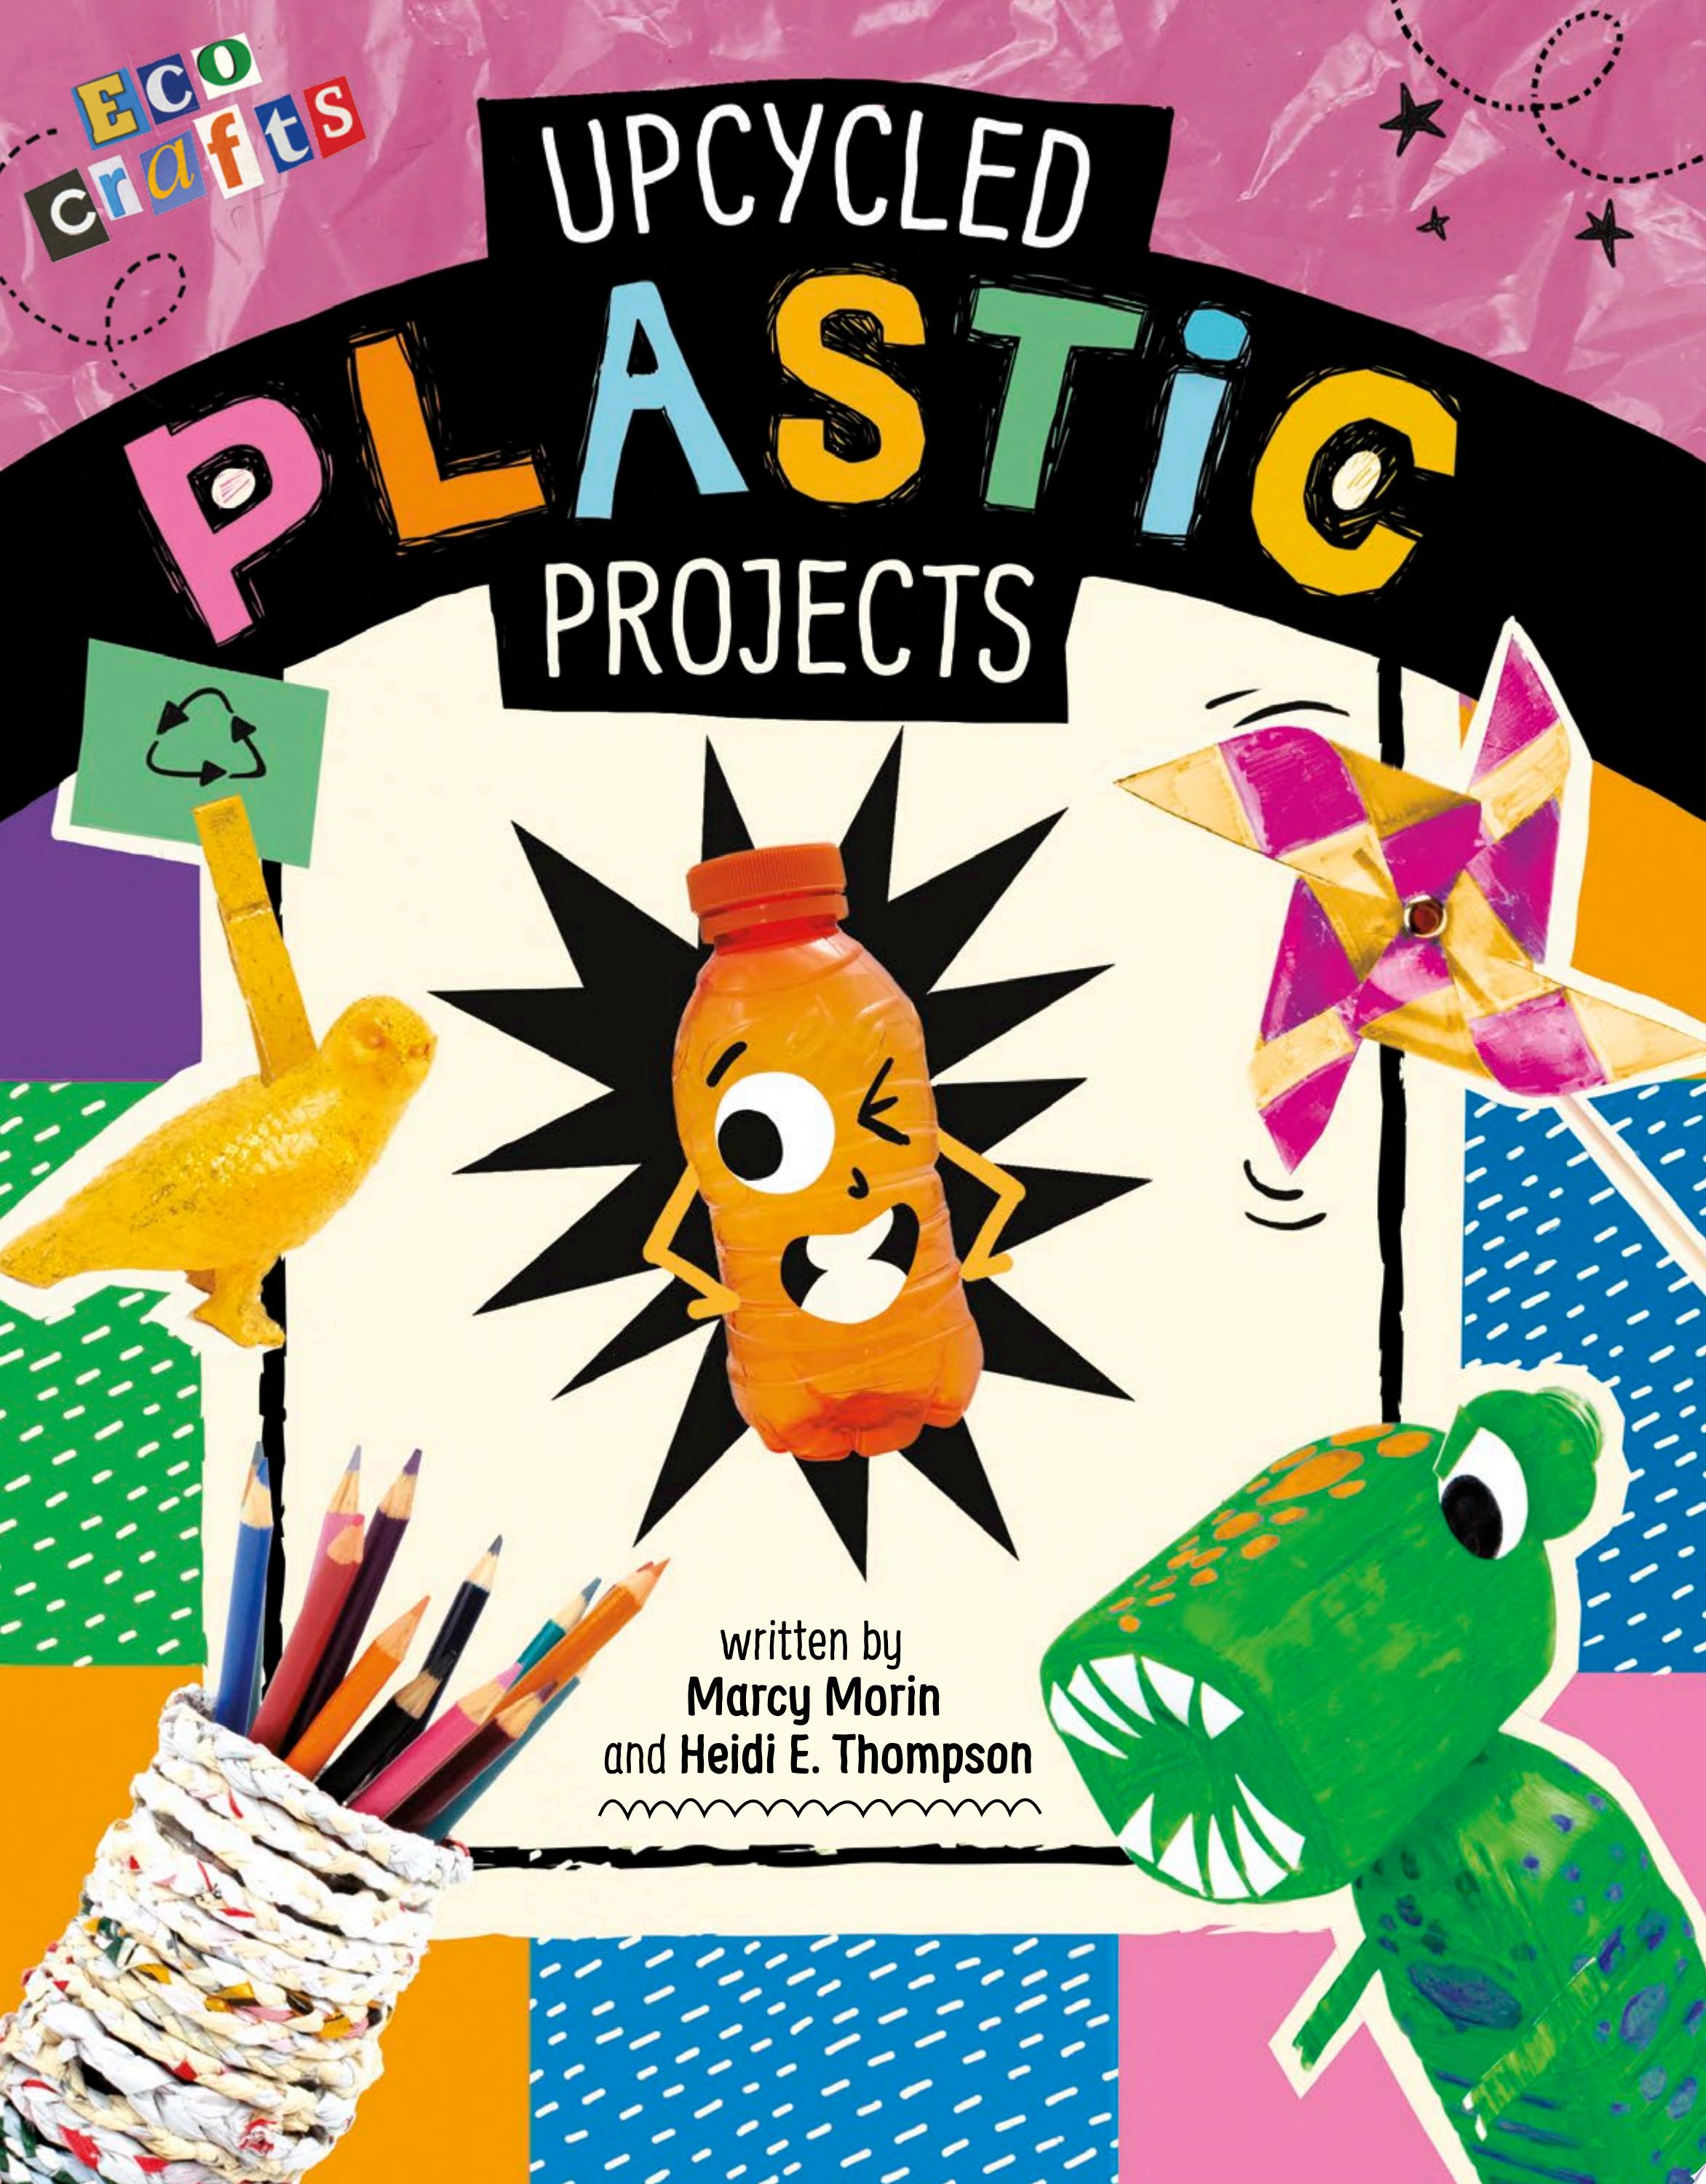 Image for "Upcycled Plastic Projects"